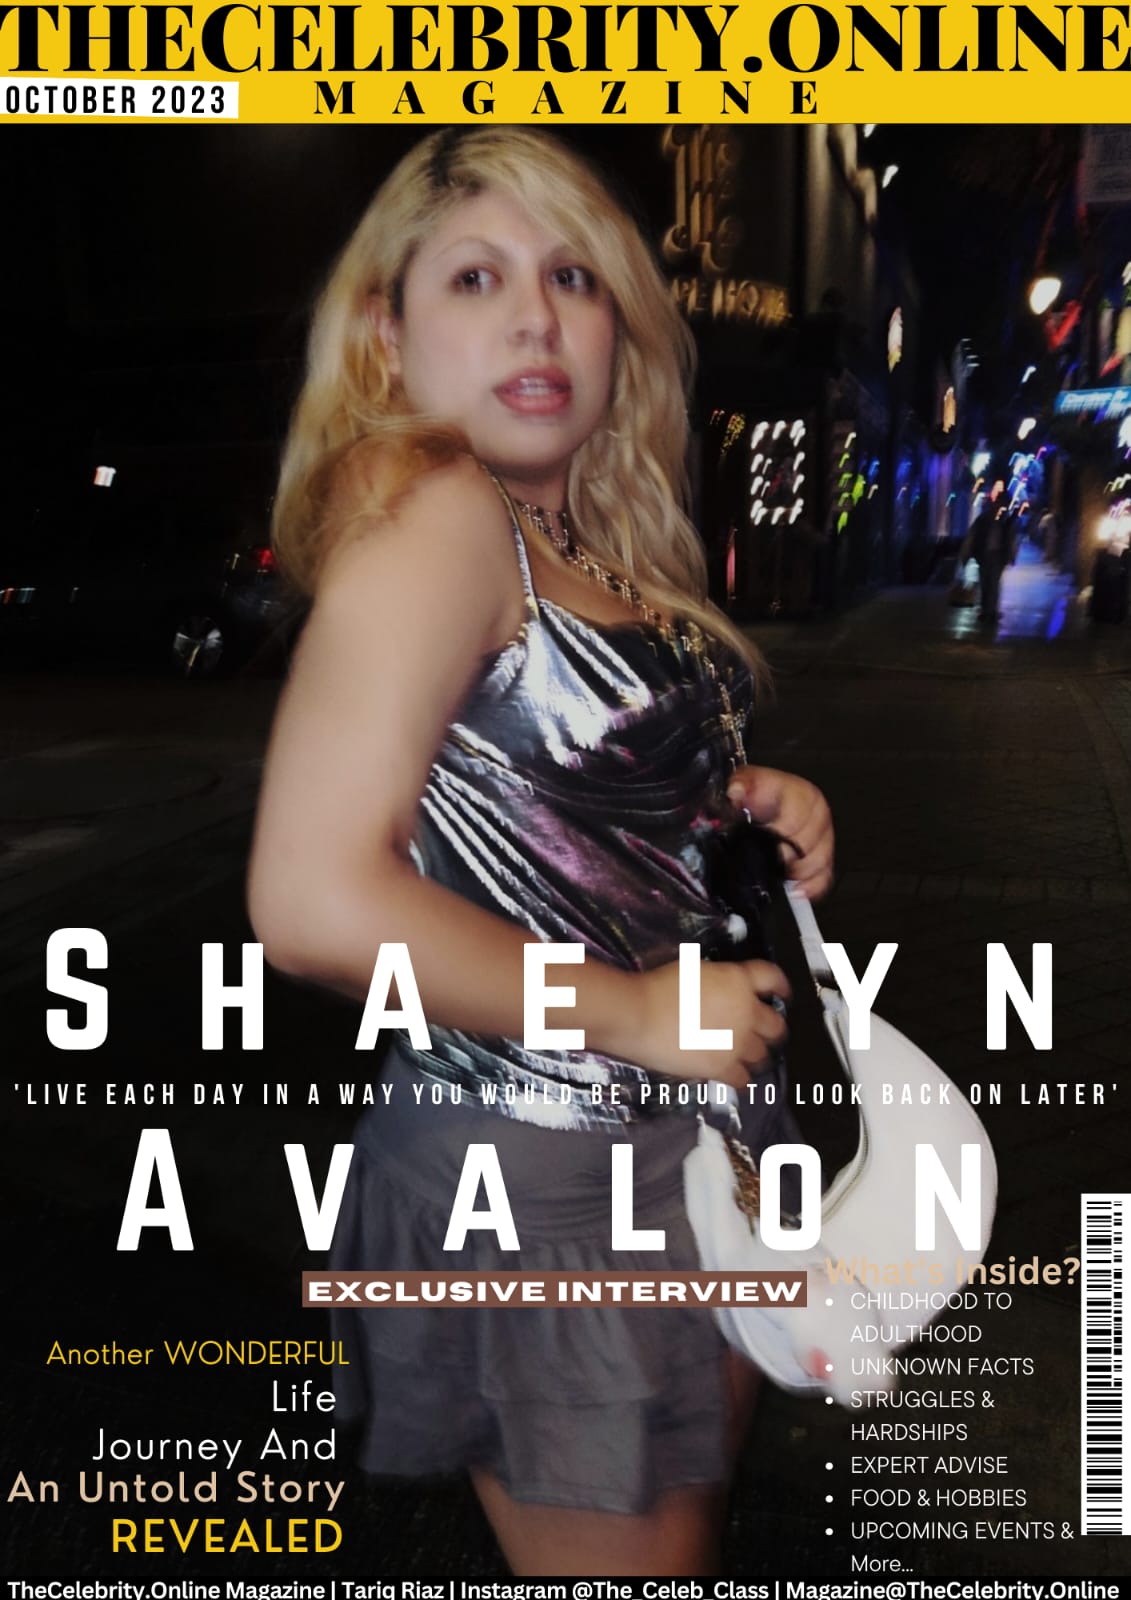 Shaelyn Avalon Exclusive Interview – ‘Live Each Day In A Way You Would Be Proud To Look Back On Later’